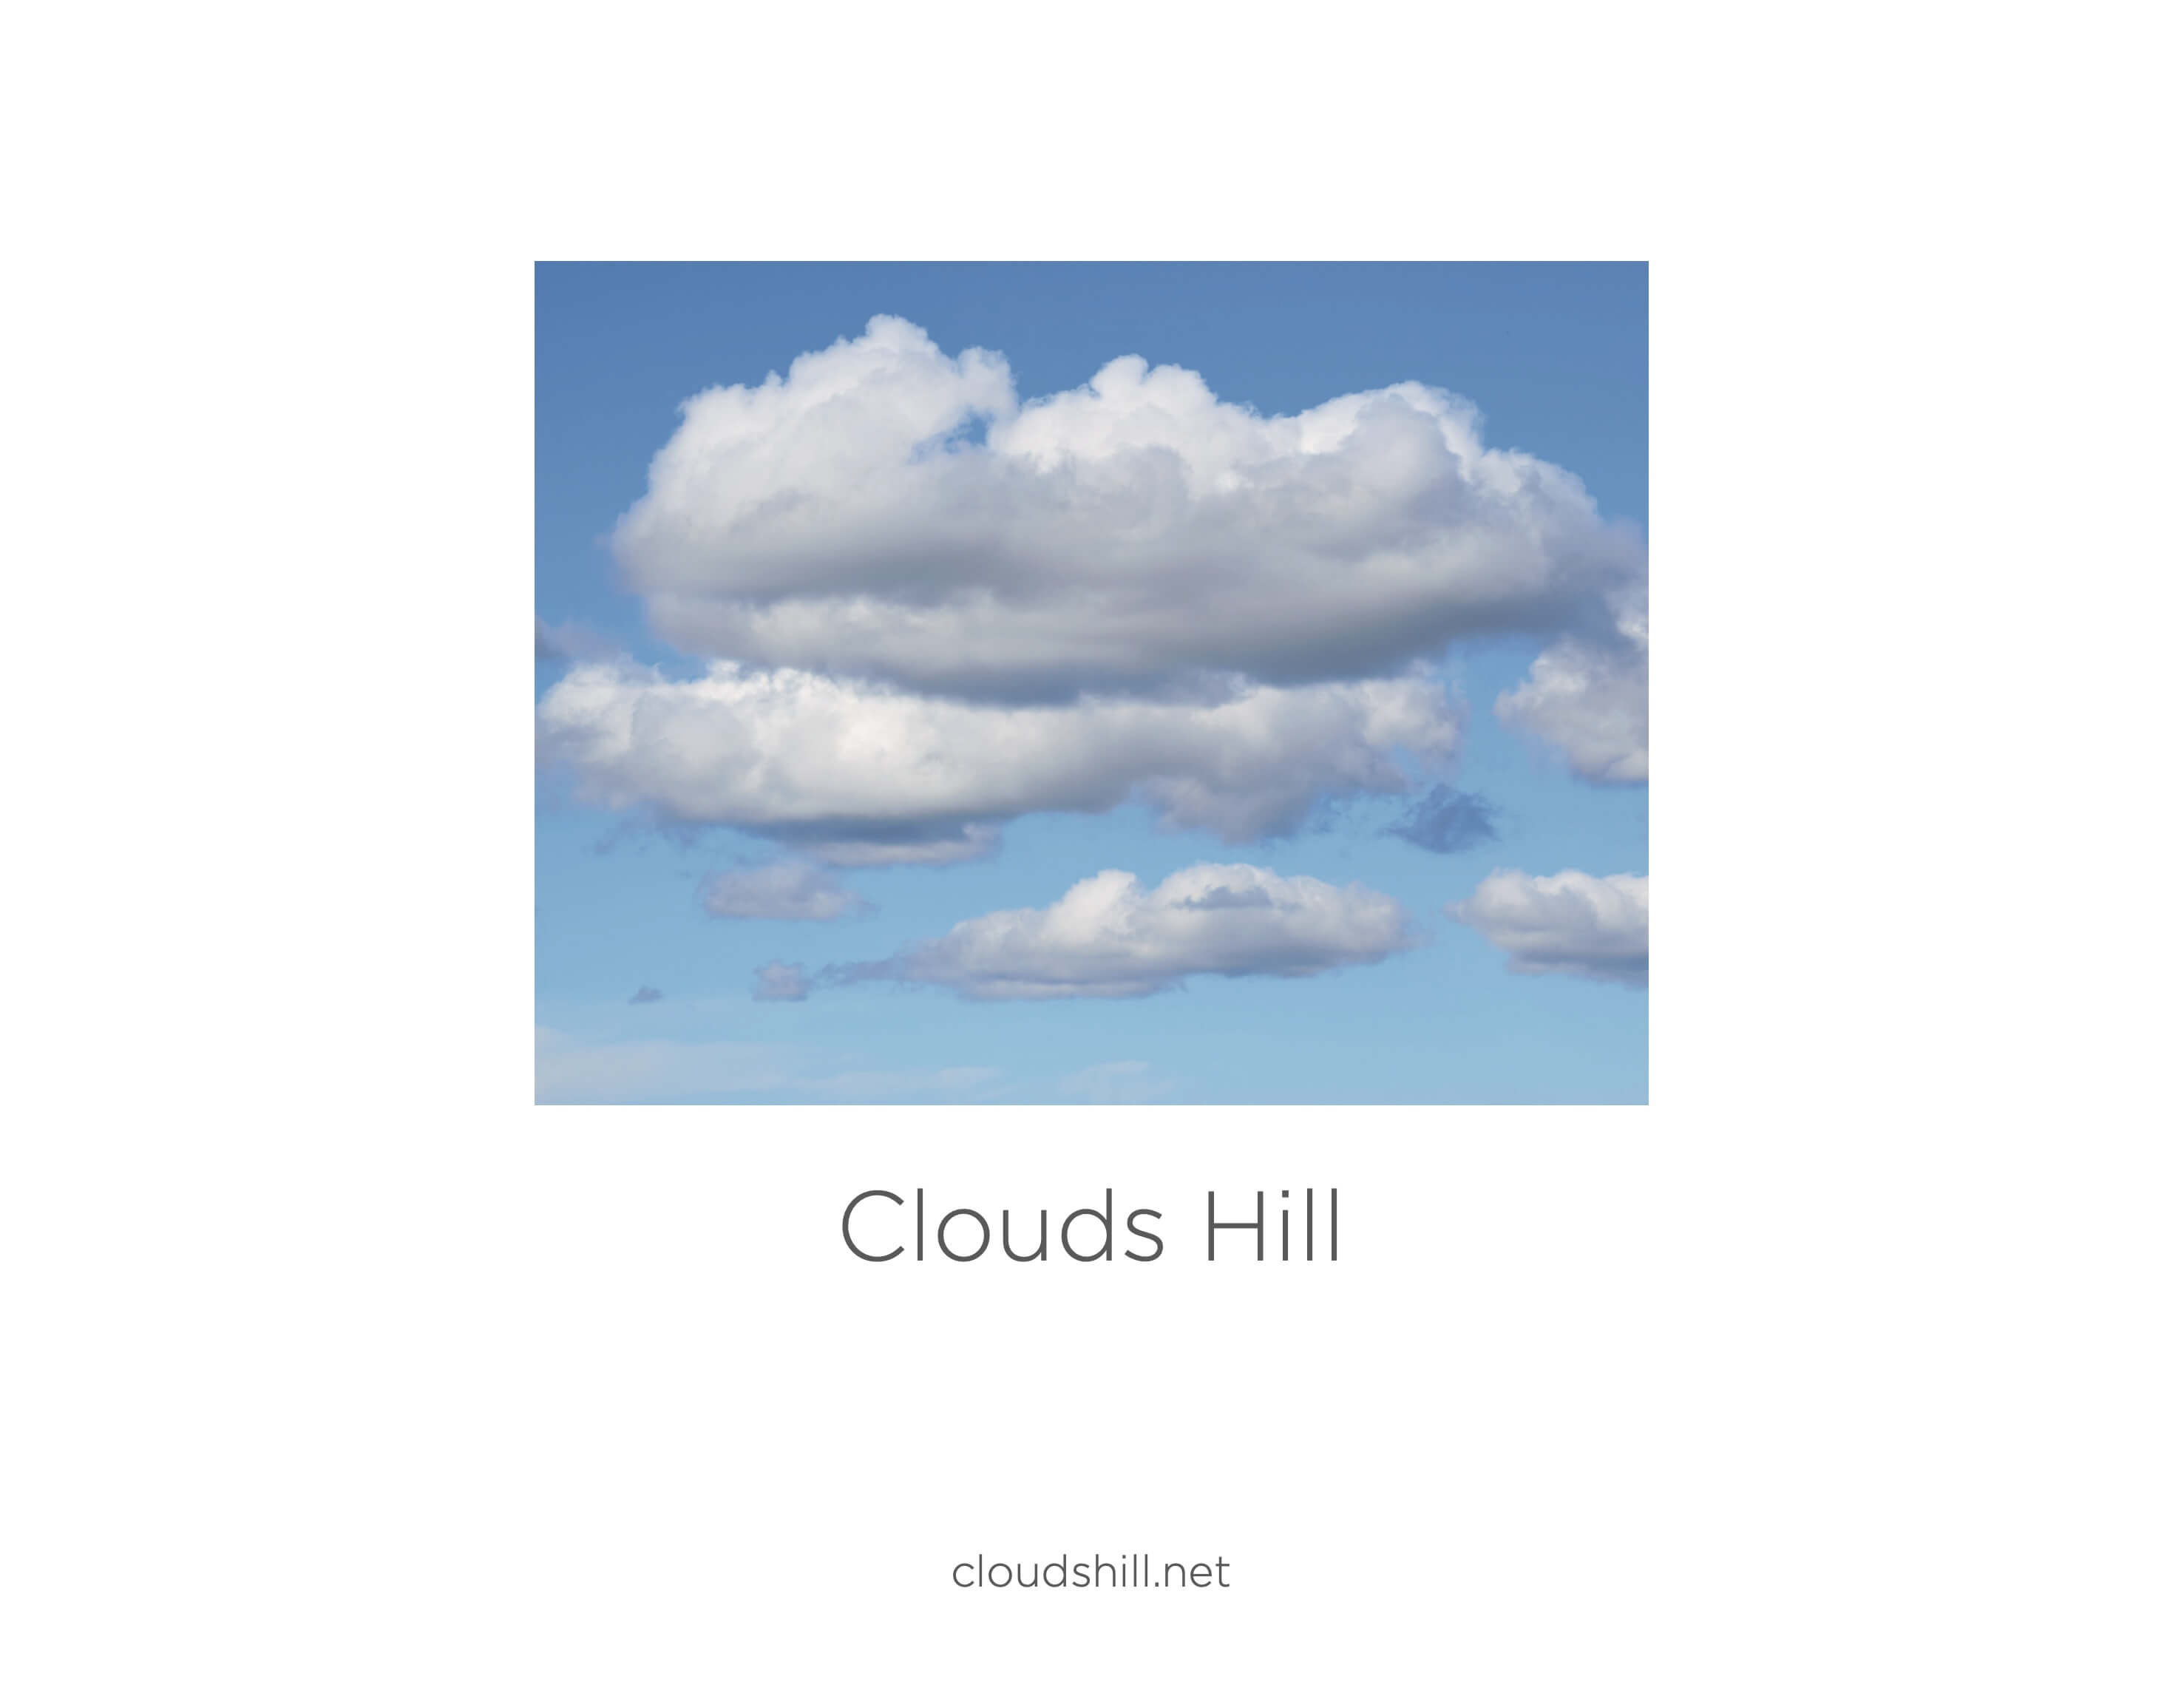 Cover of a sales brochure with a cloud image